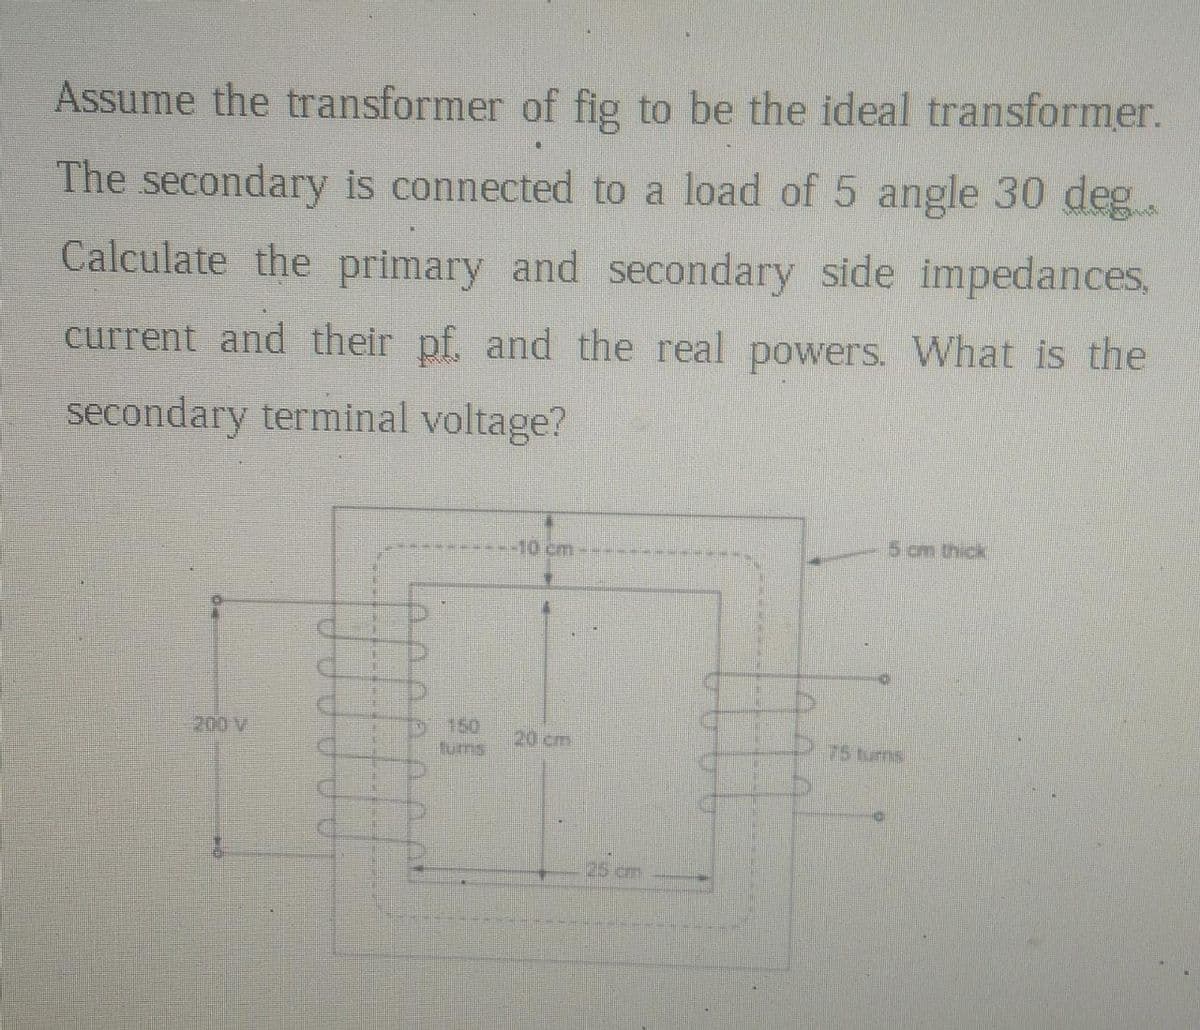 Assume the transformer of fig to be the ideal transformer.
The secondary is connected to a load of 5 angle 30 deg
Calculate the primary and secondary side impedances,
current and their pf. and the real powers. What is the
secondary terminal voltage?
DUUUUU
25 cm
5 cm thick